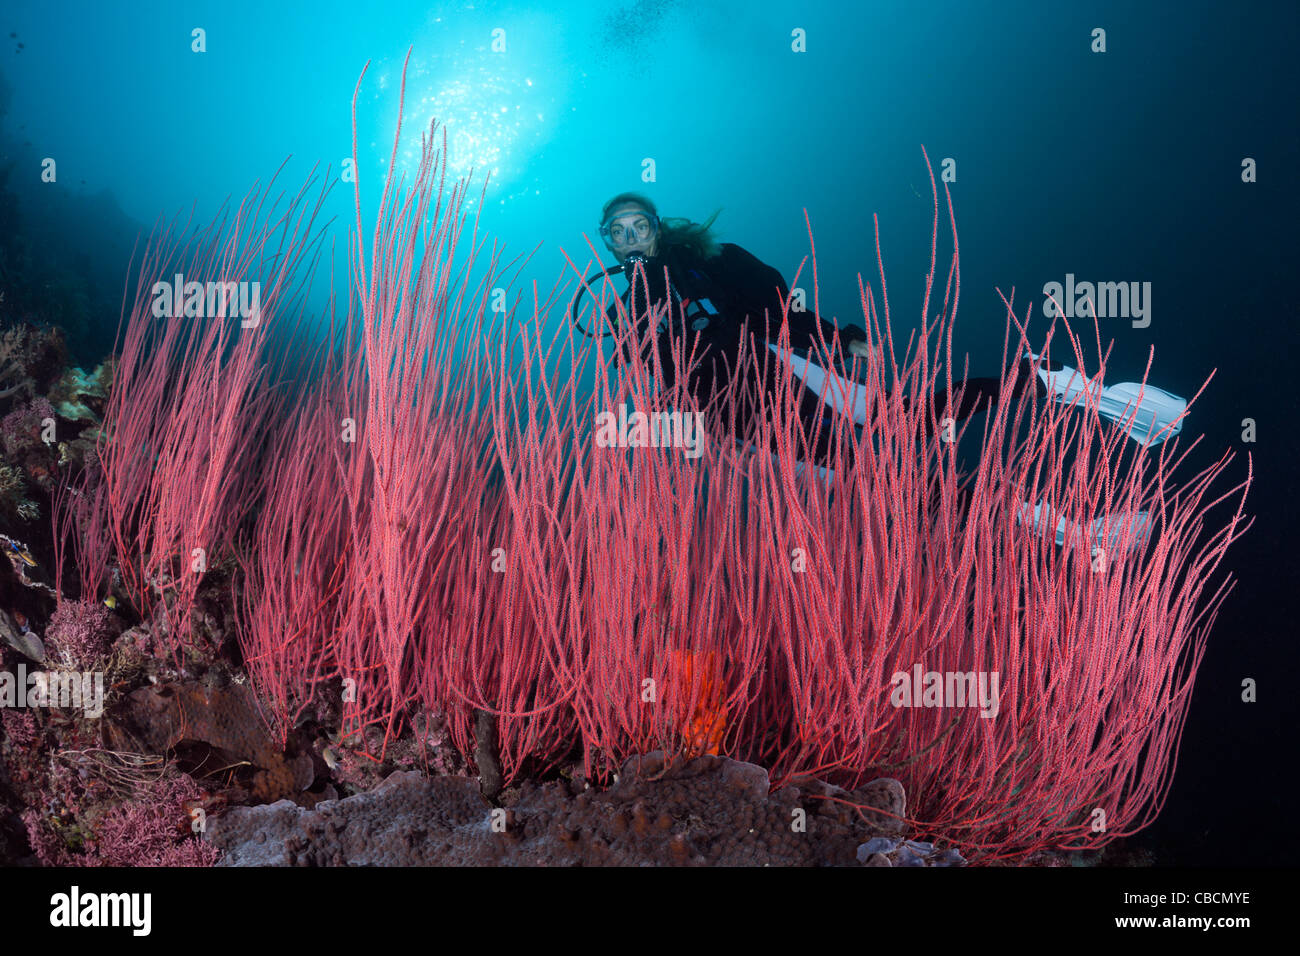 Scuba Diver and Whip corals, Ellisella ceratophyta, Cenderawasih Bay, West Papua, Indonesia Stock Photo